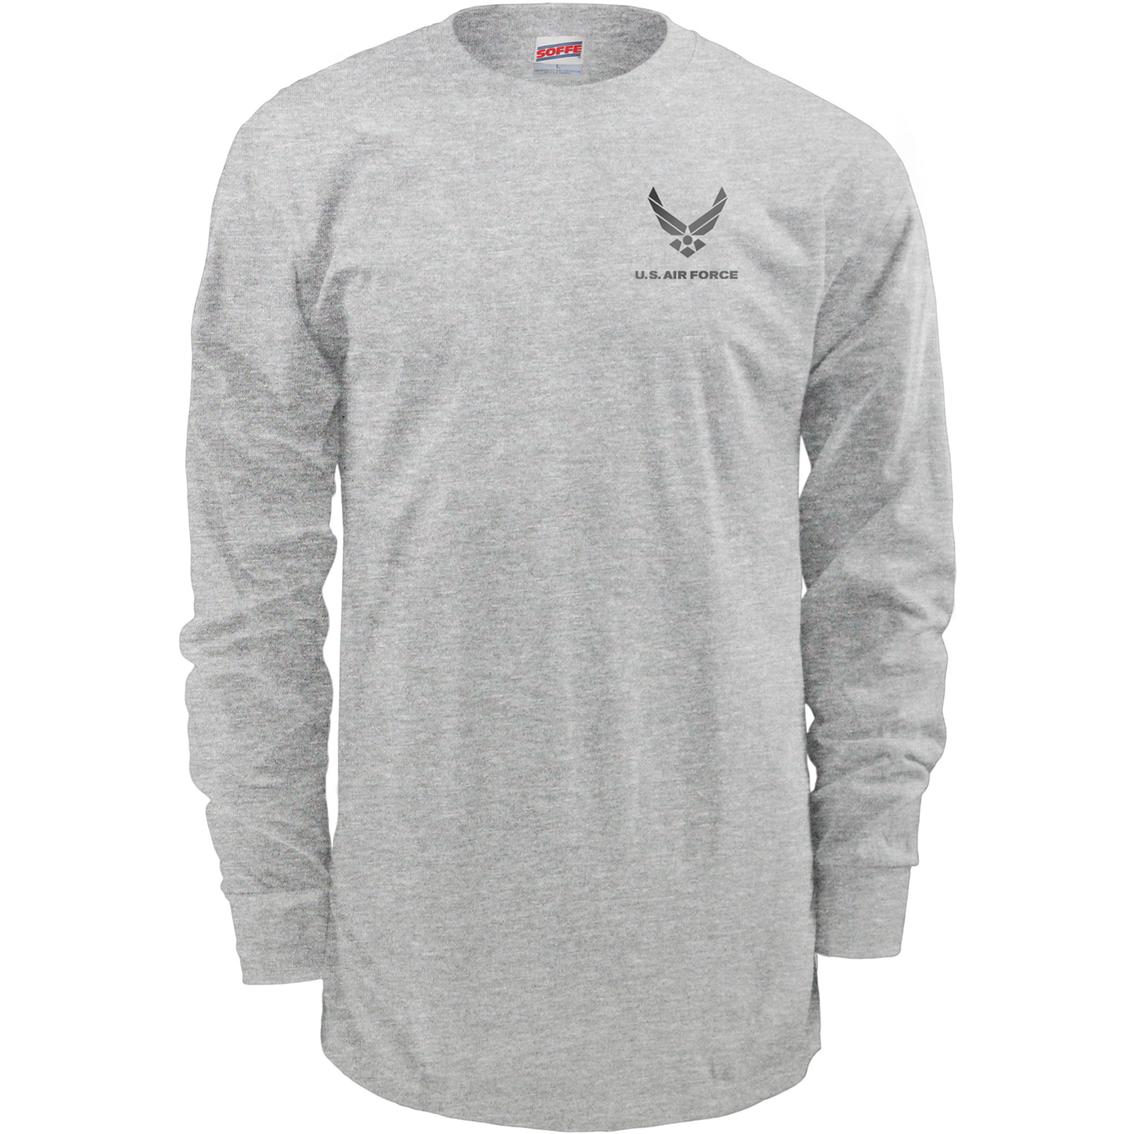 Air Force Long Sleeve Physical Training Tee - Image 1 of 2